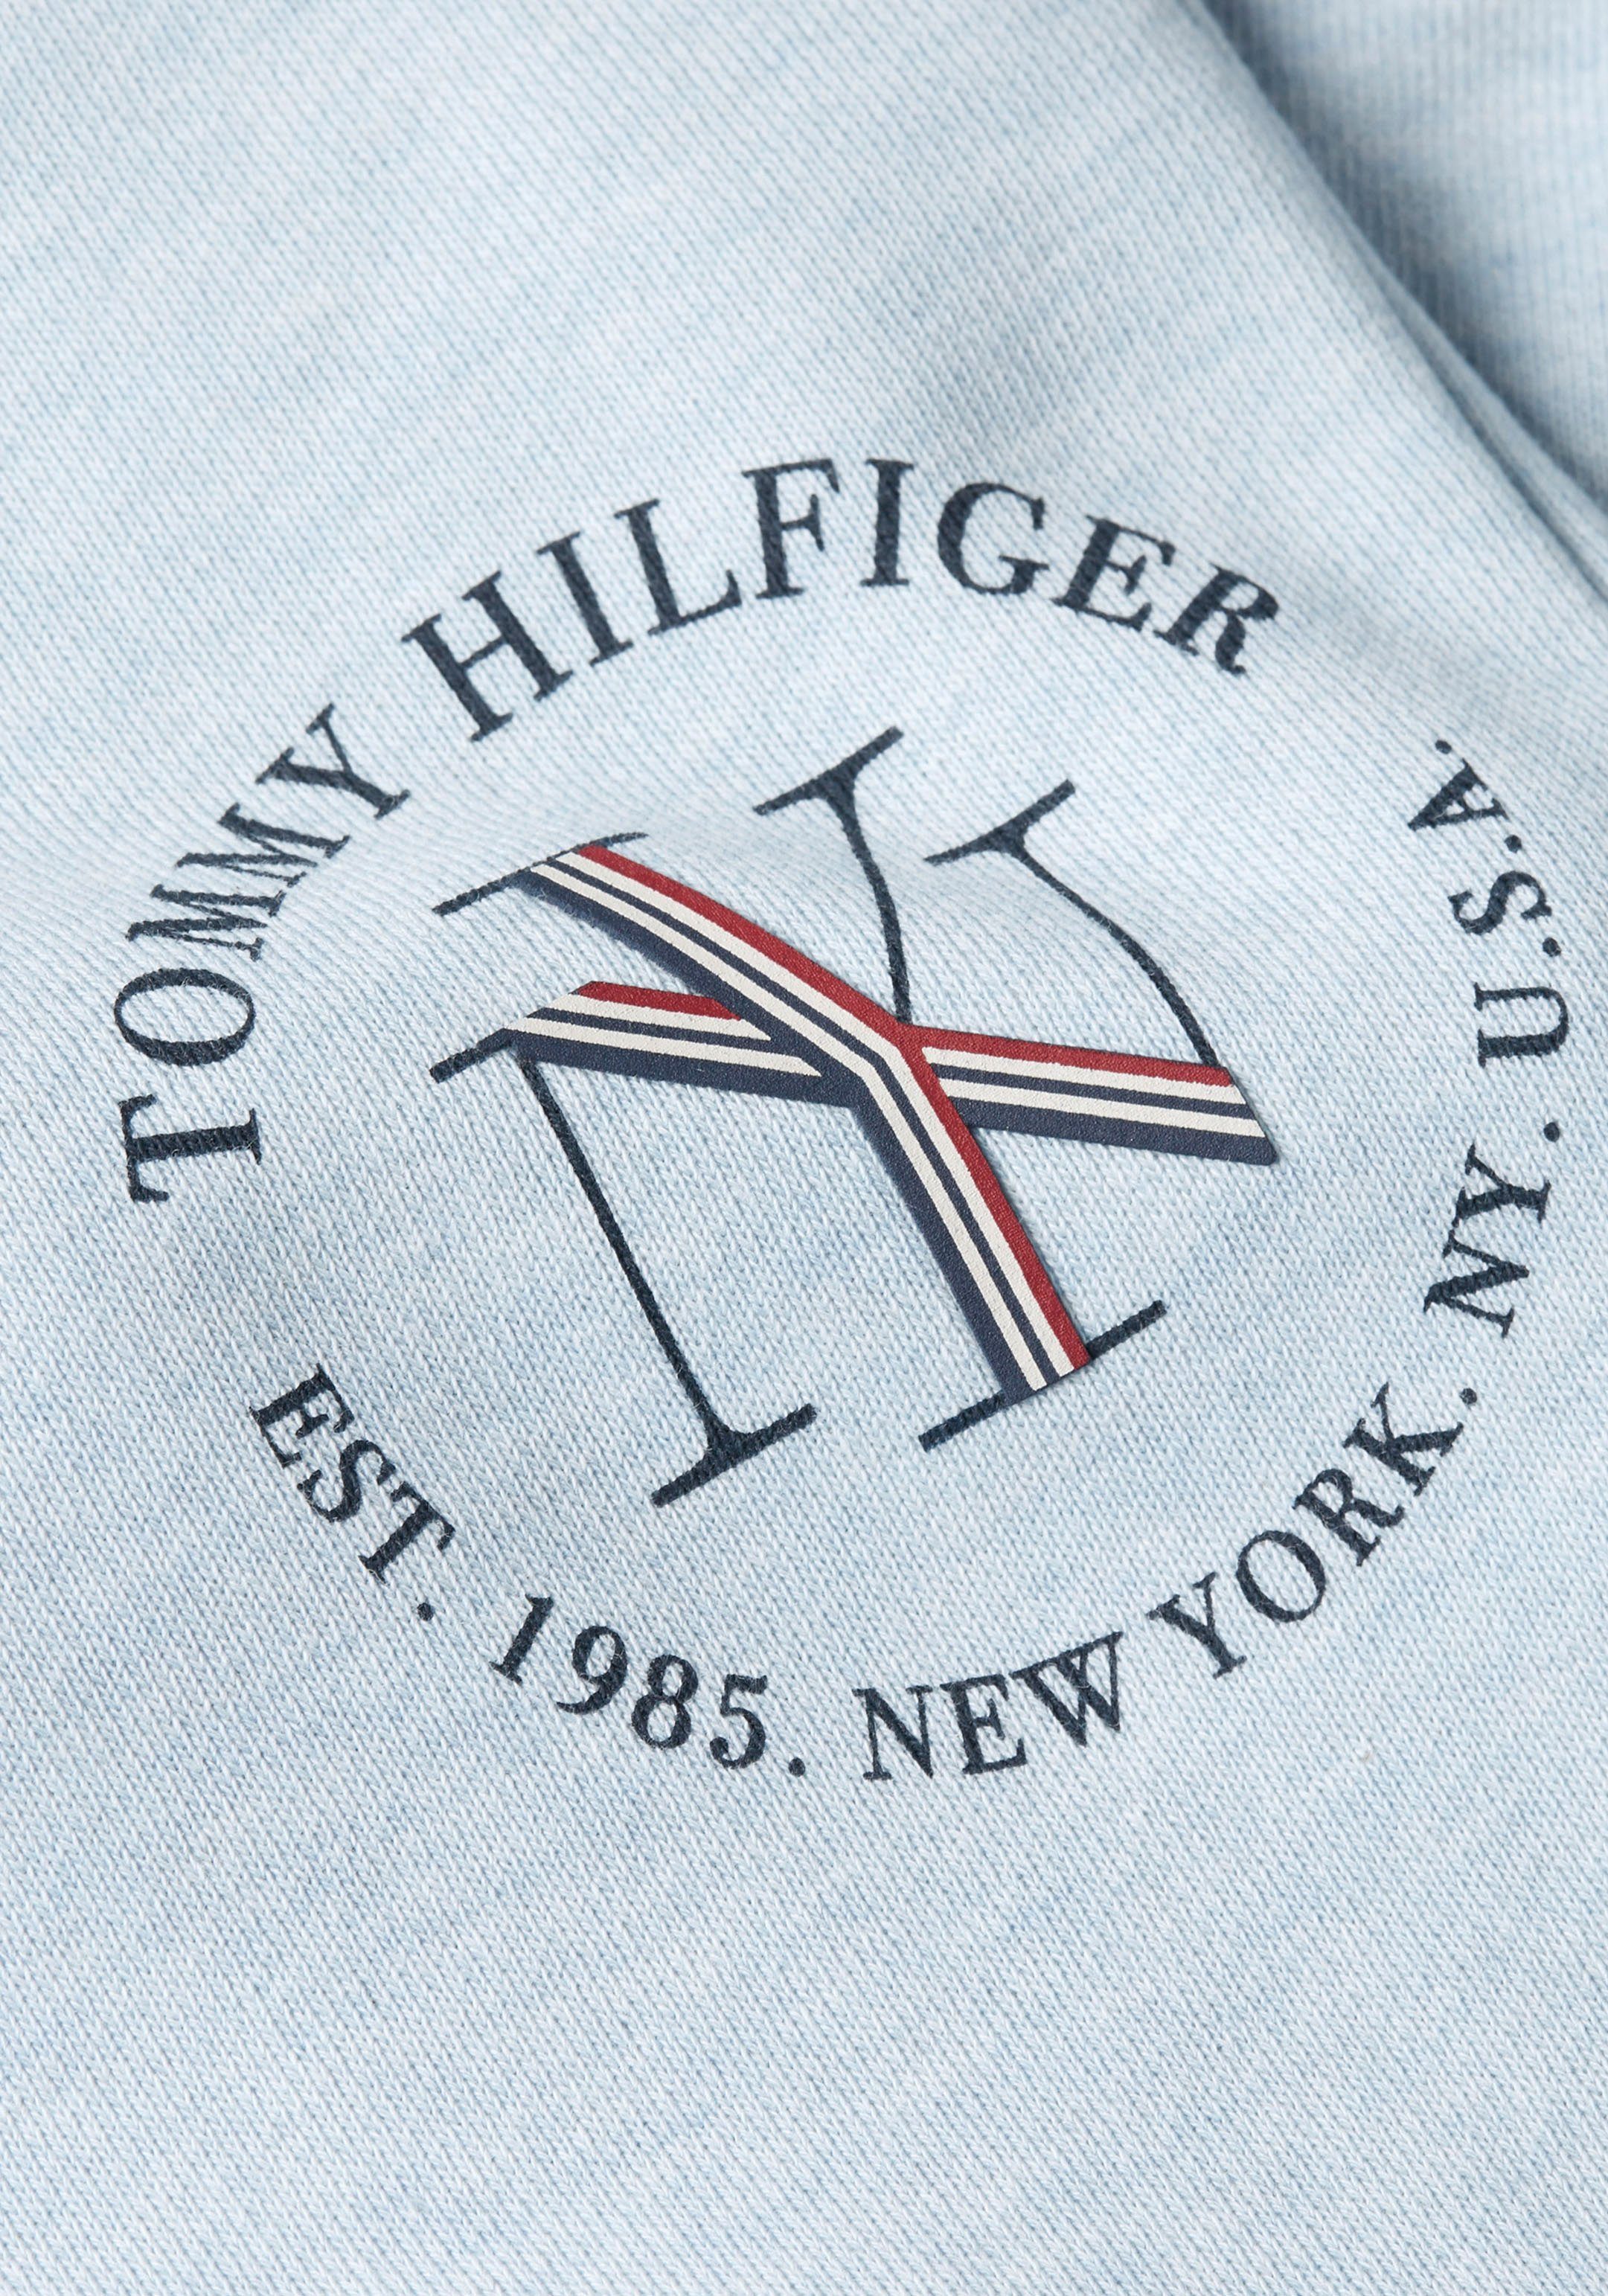 Markenlabel ROUNDALL mit SWEATPANTS TAPERED Breezy-Blue-Heather NYC Tommy Hilfiger Hilfiger Tommy Sweatpants